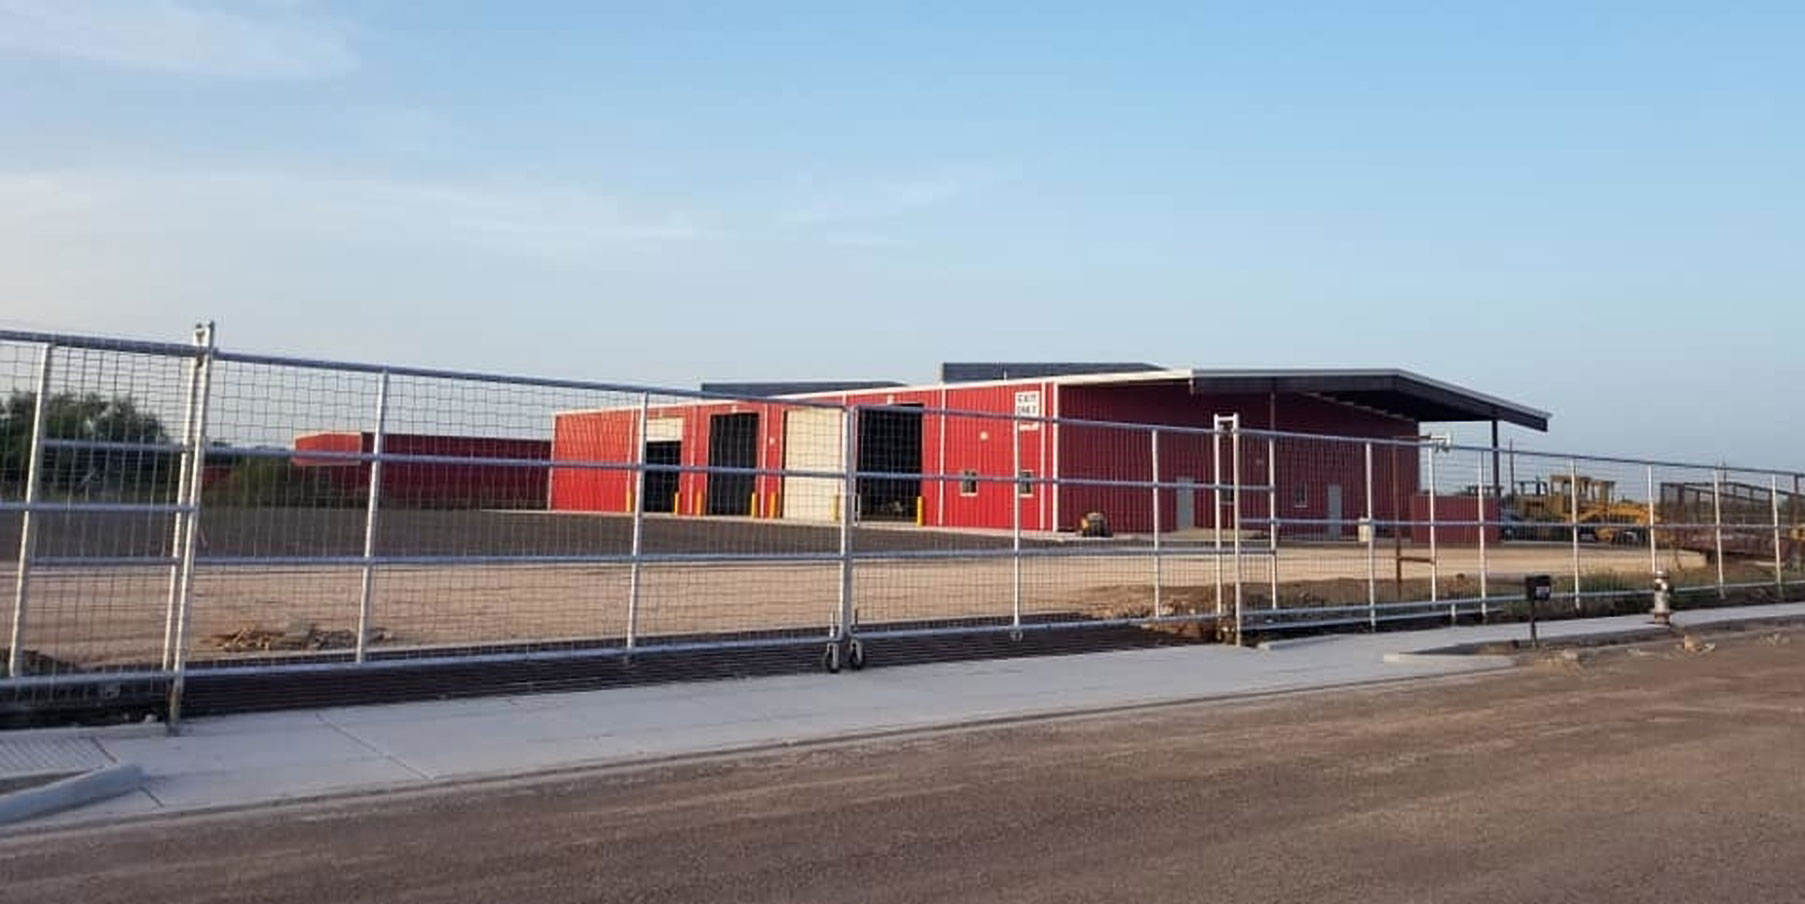 The US 281 Truck And Trailer Services LLC truck shop in Edinburg is almost ready.